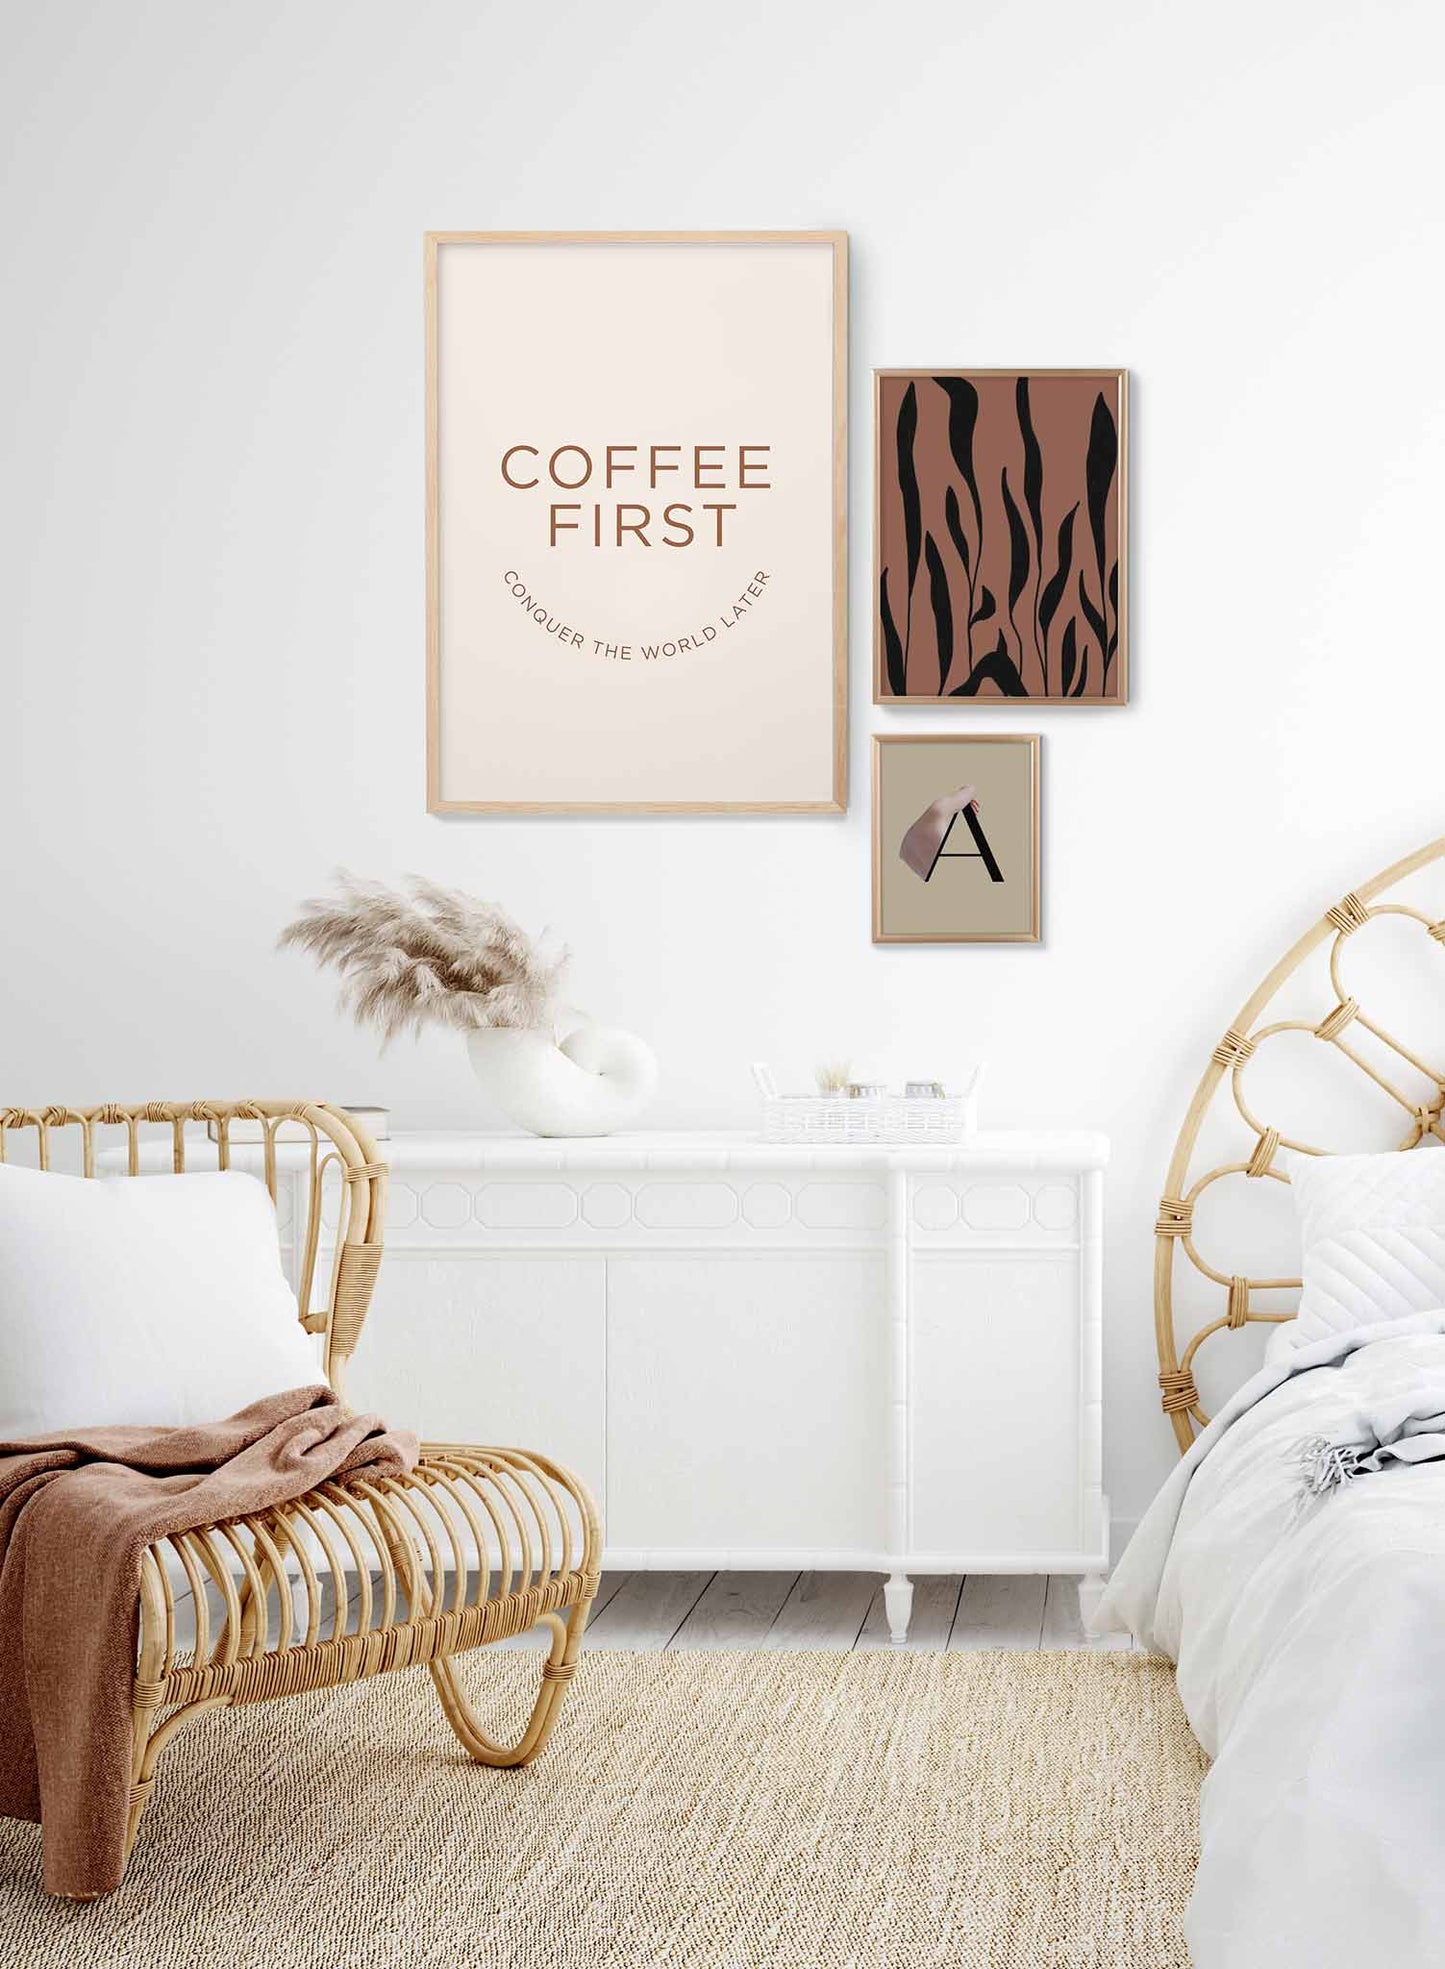 Priorities is a a coffee themed and humorous typography poster by Opposite Wall.